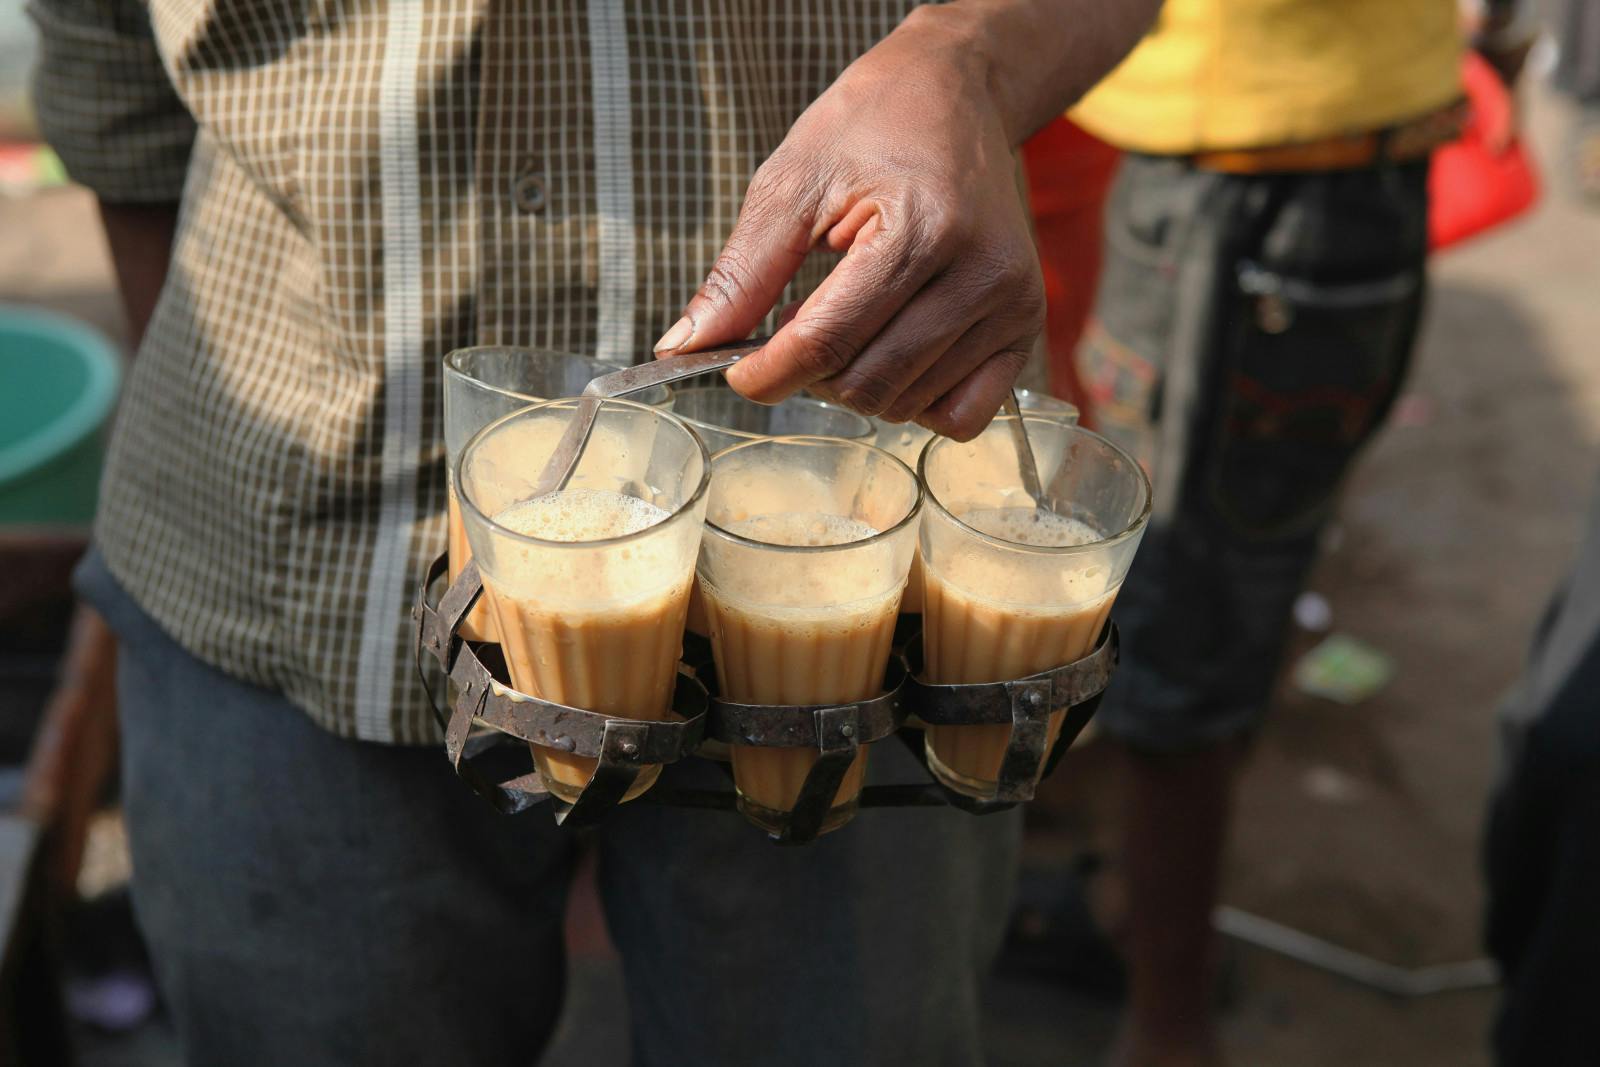 A chai vendor carrying glasses of tea in Delhi, India (Eye Ubiquitous/Universal Images Group via Getty Images)